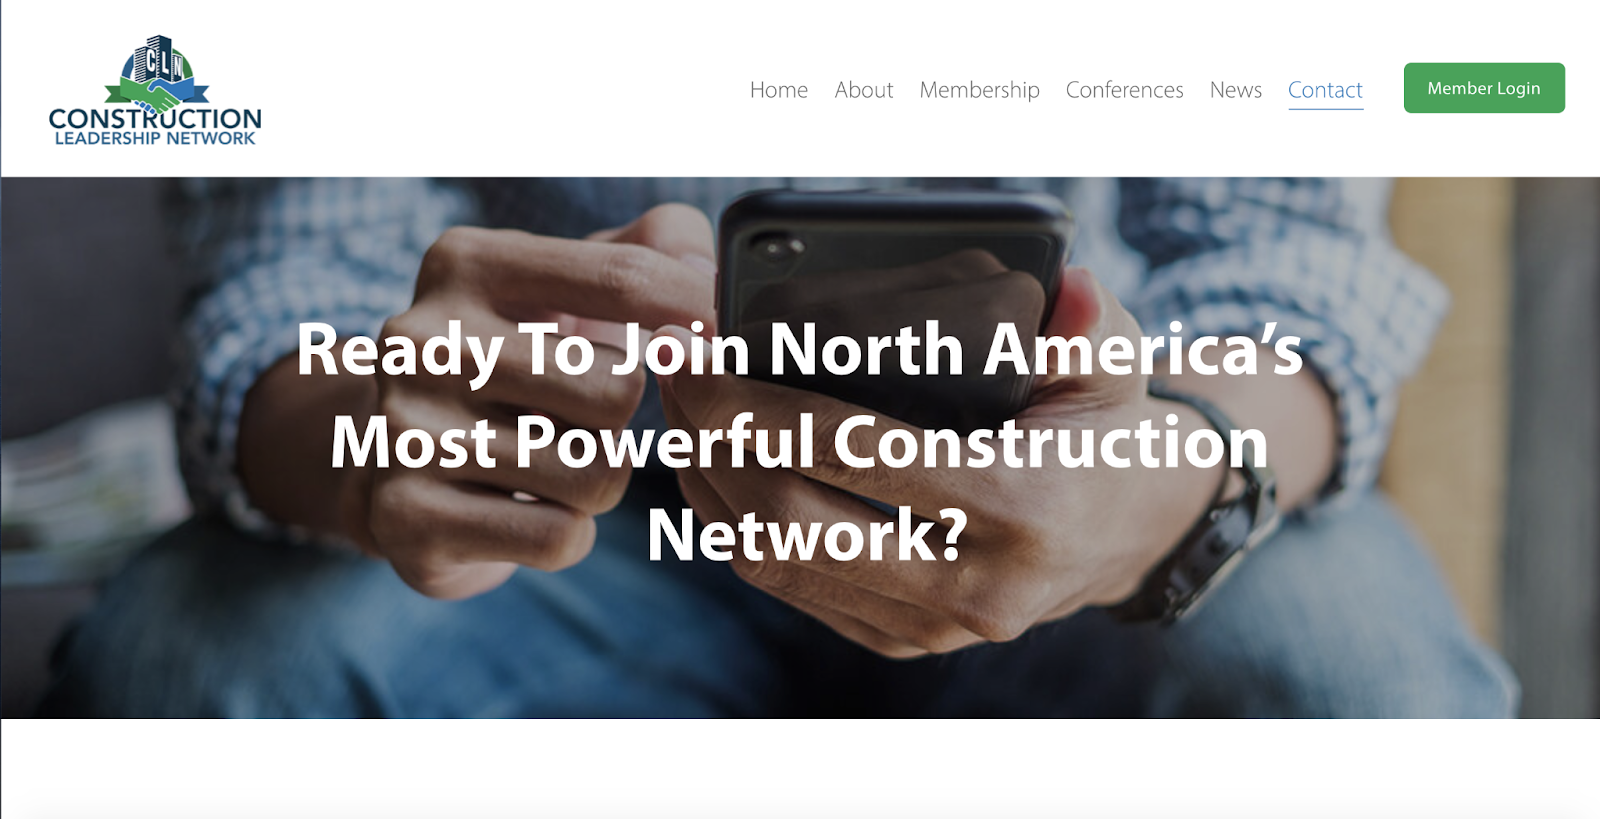 Construction Leadership Network homepage that has a "Contact" button in the top navigation, highlighted in a contrasting colour to the other menu options.